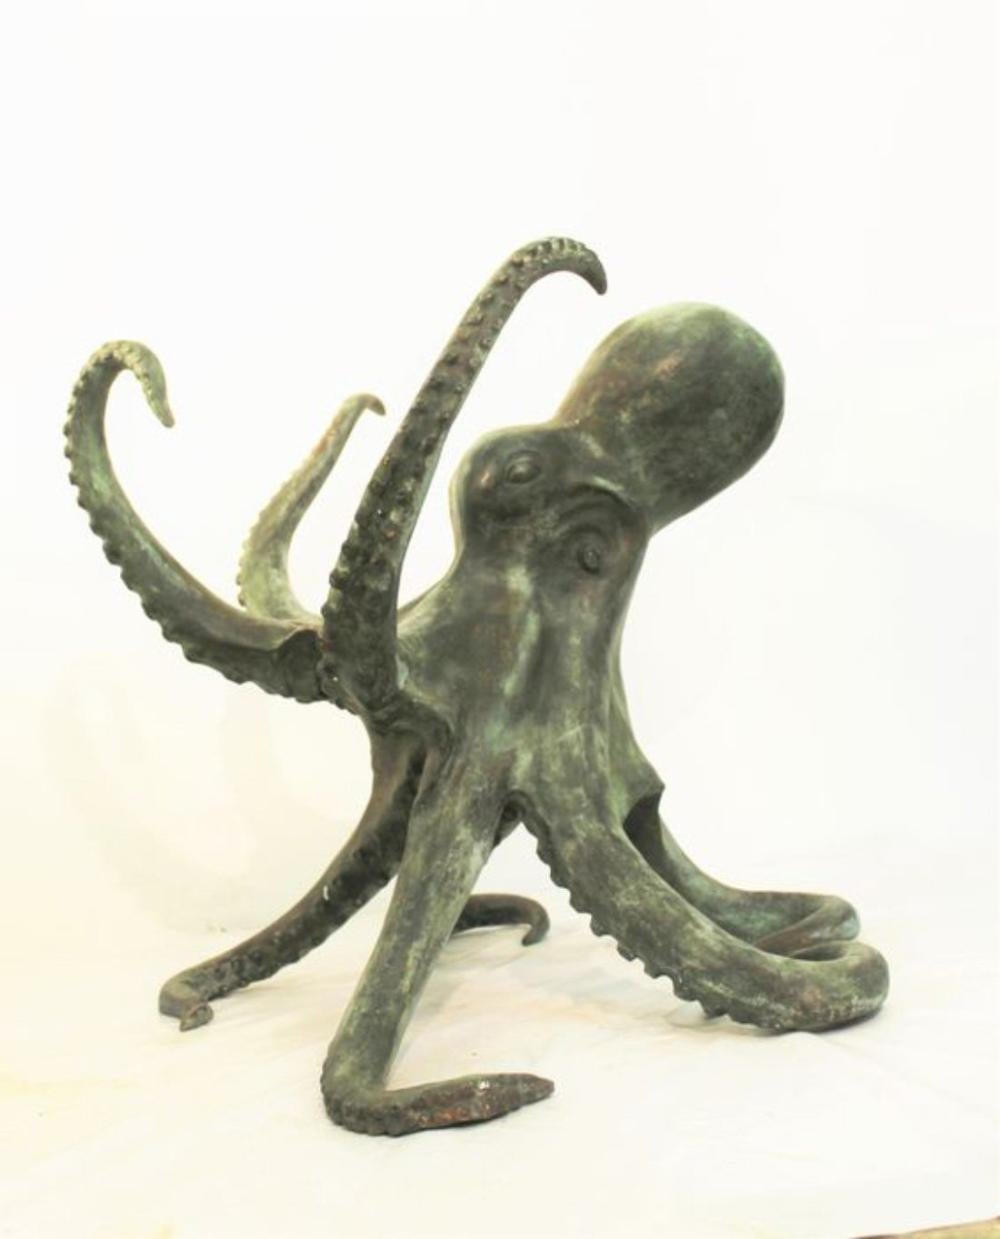 Octopus in bronze Octopus sculpture in bronze, used for table base, the sculpture is perfectly original in the smallest details, 20th century. Good condition - used with small signs of aging & blemishes Dimensions: 78 x 75 x 75cm.
 